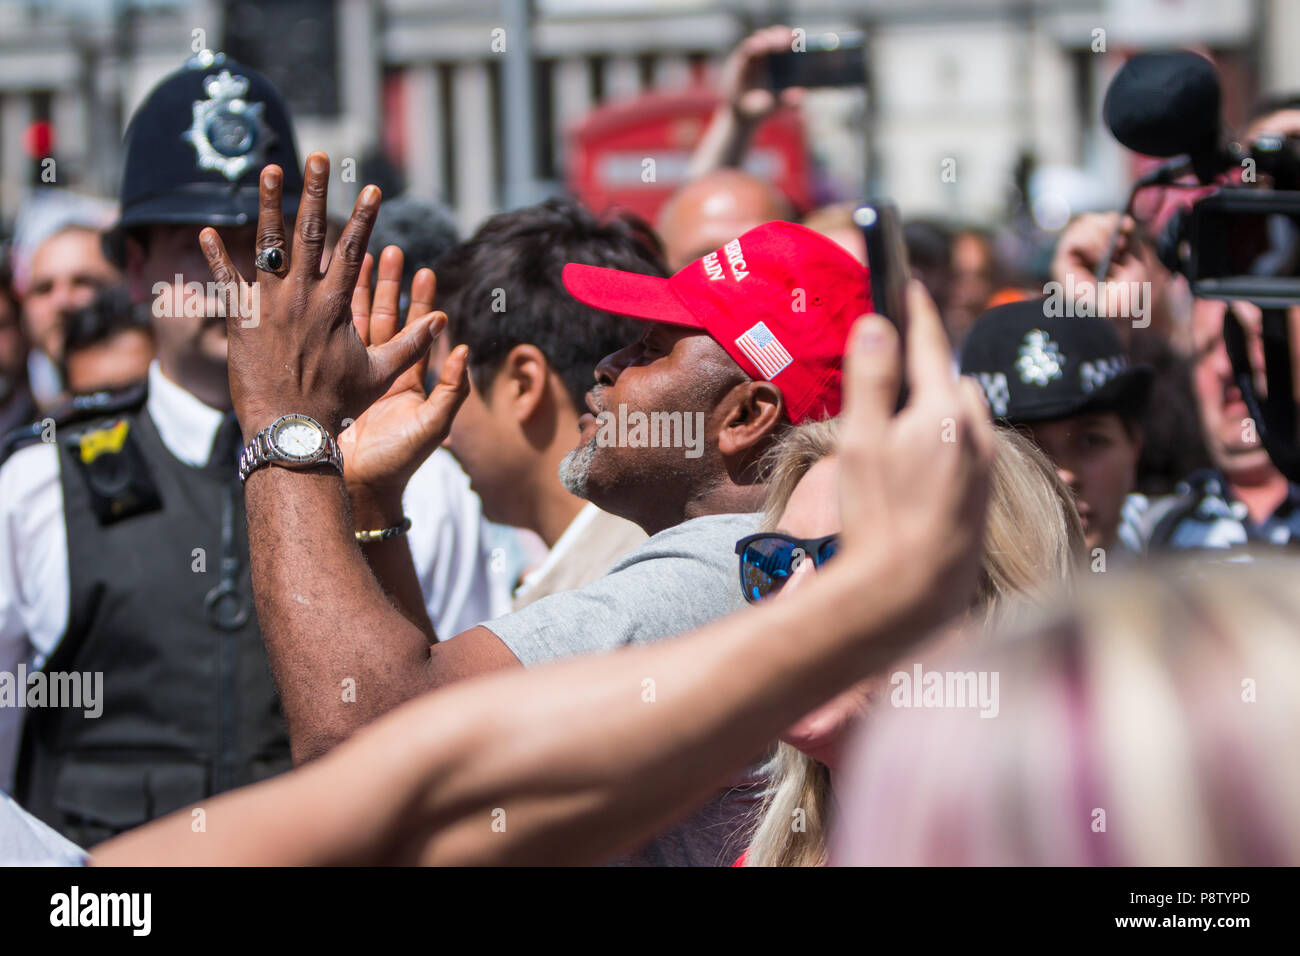 London, UK. 13th July, 2018. Trump supporters observe protest against Donald Trump's visit Credit: Zefrog/Alamy Live News Stock Photo